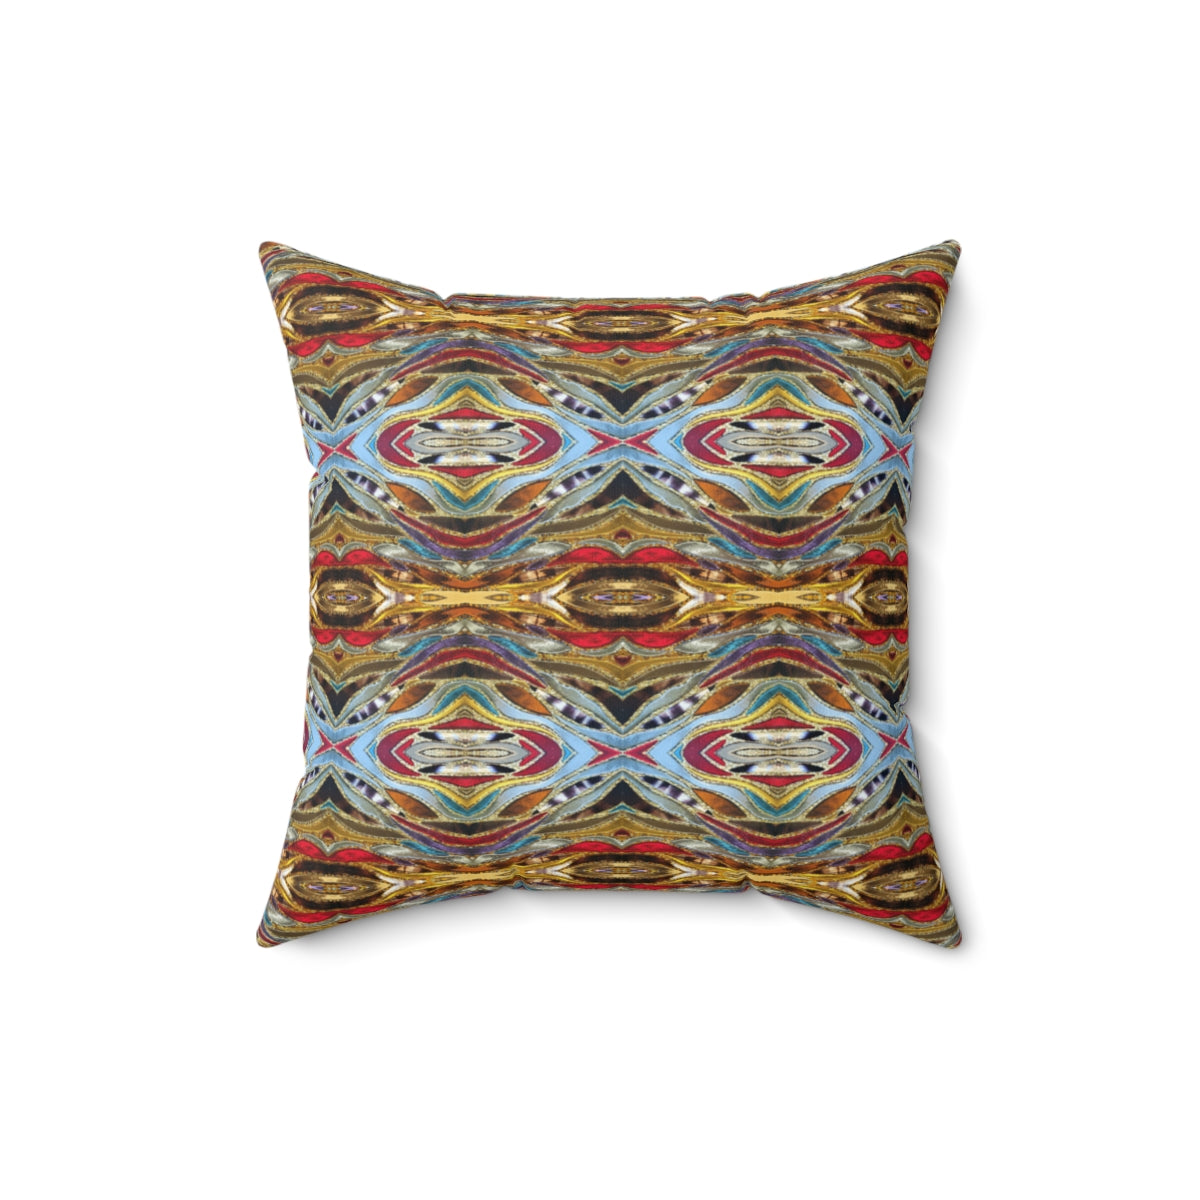 Decor pillow with brown gold silver pattern